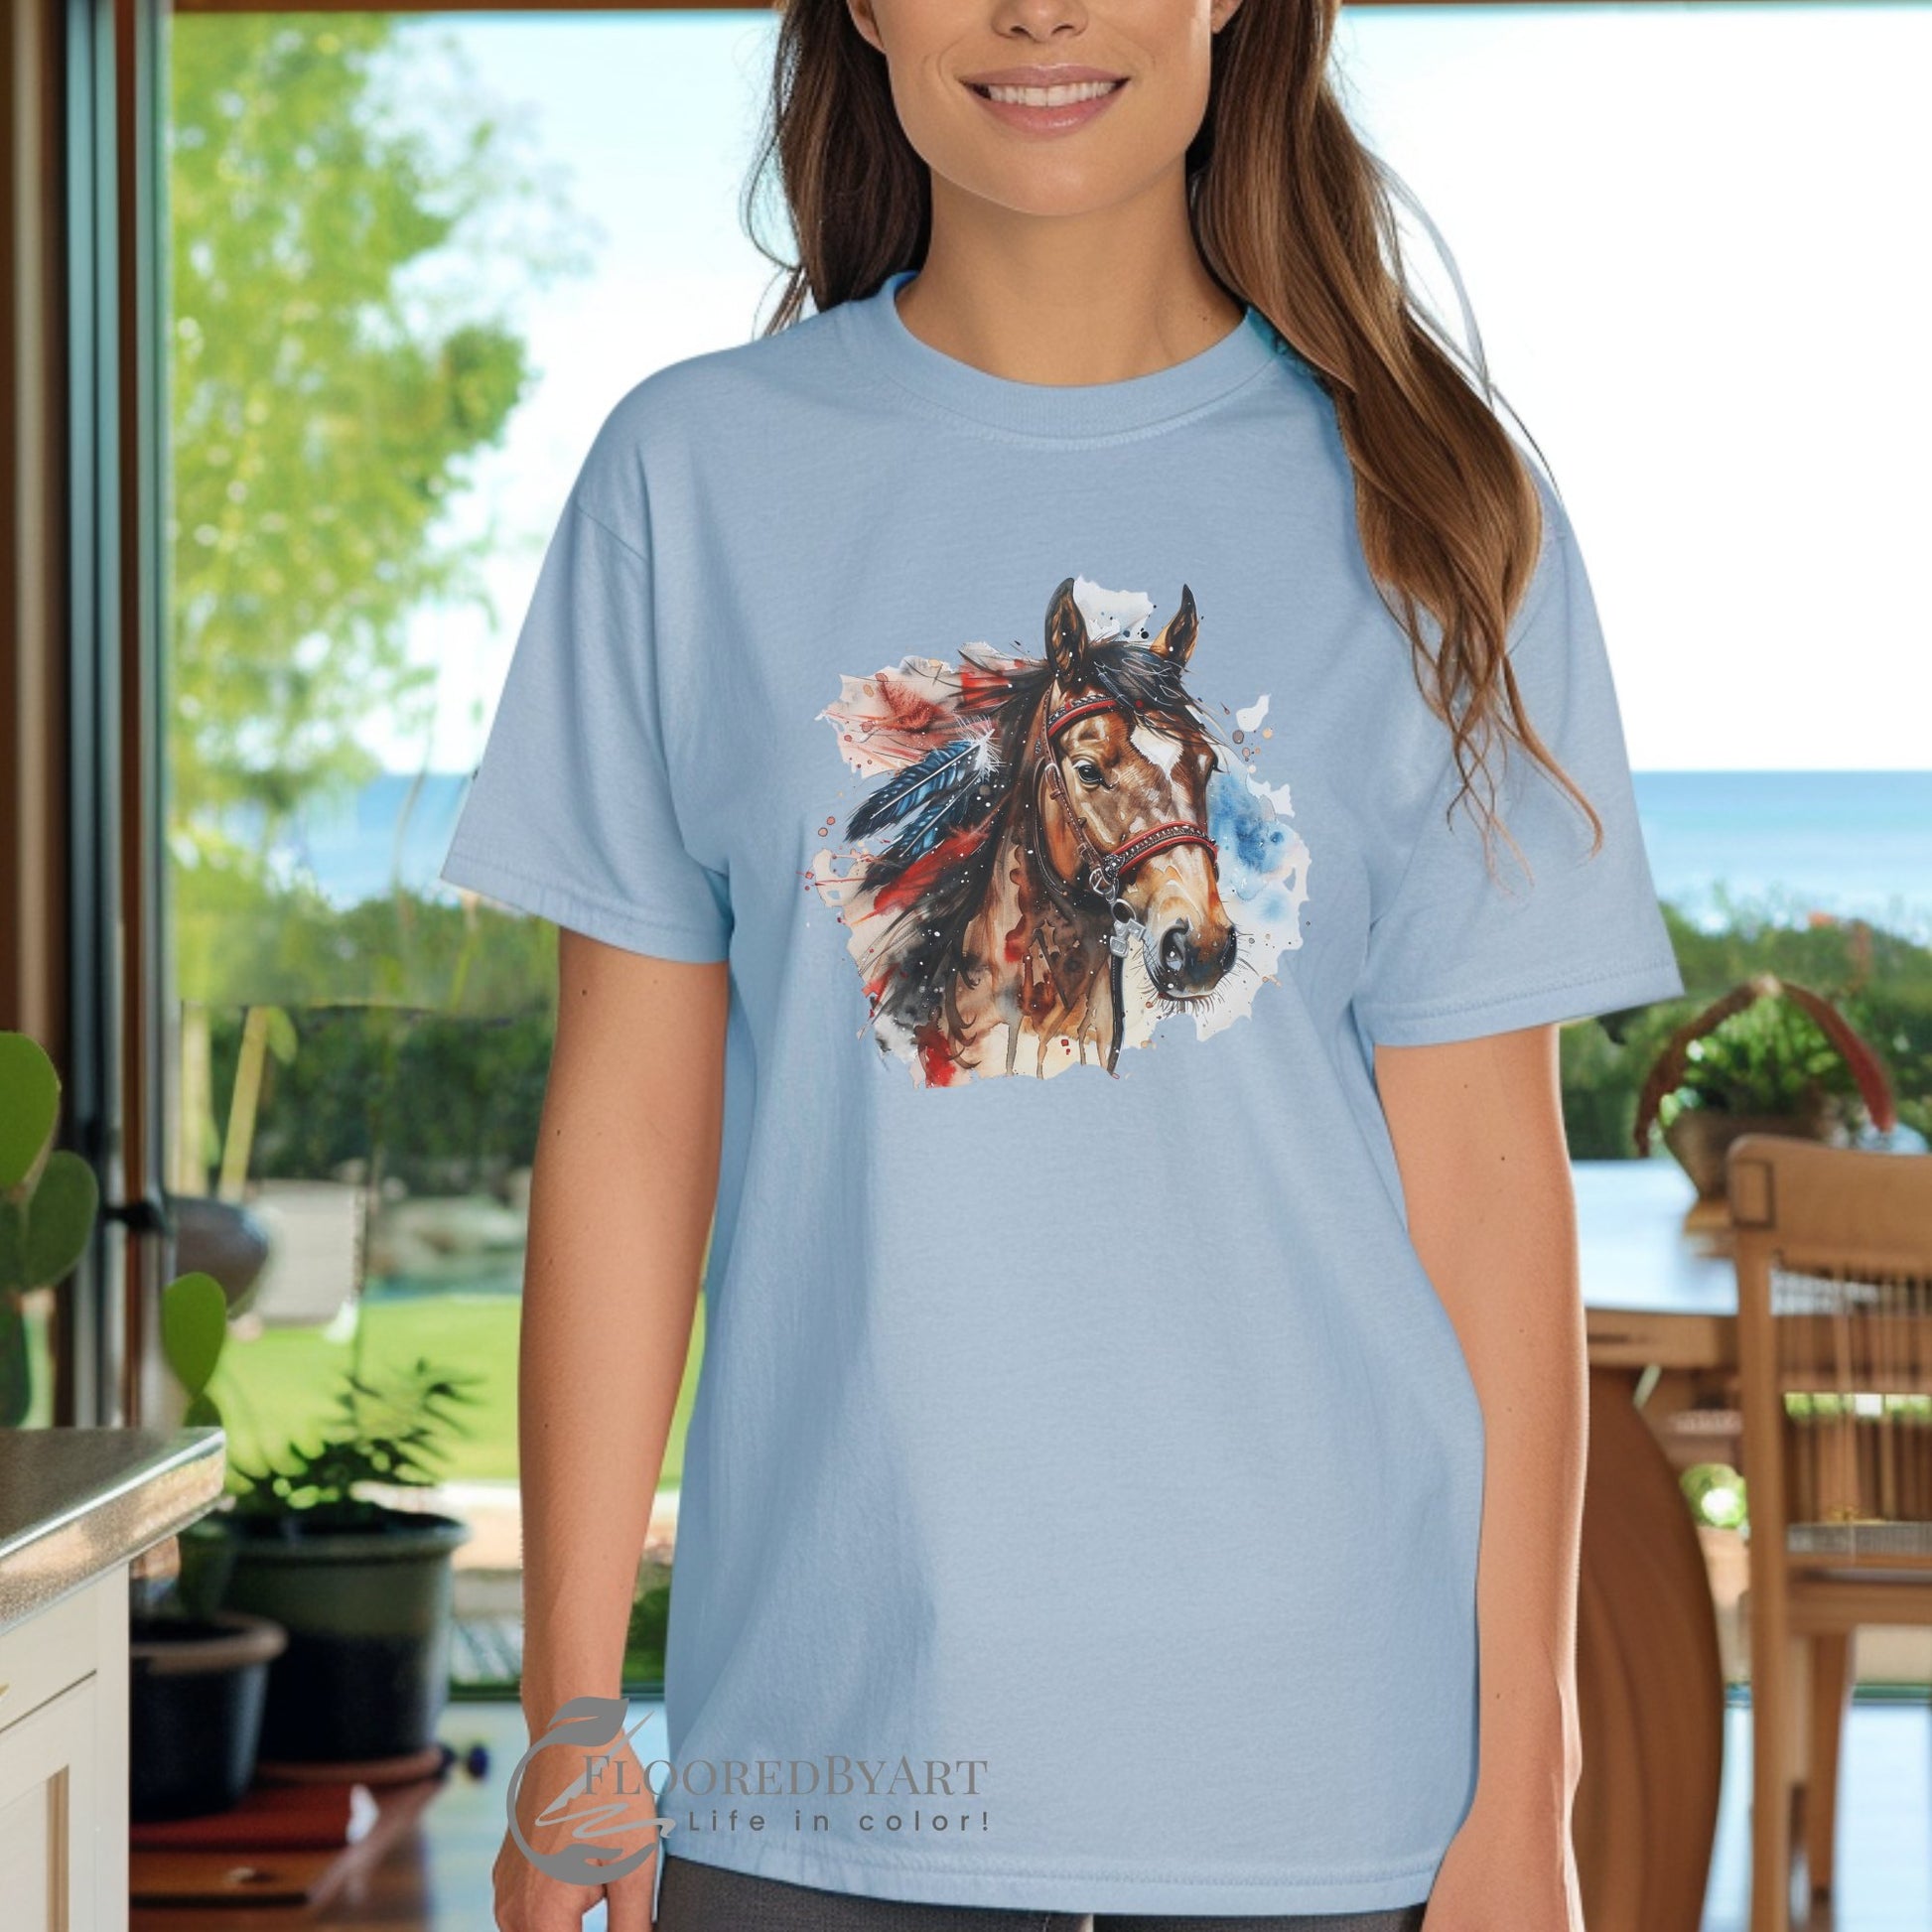 Patriotic Horse T-shirt, Comfort Color Tee, Cowgirl Spirit Horse With Feathers - FlooredByArt